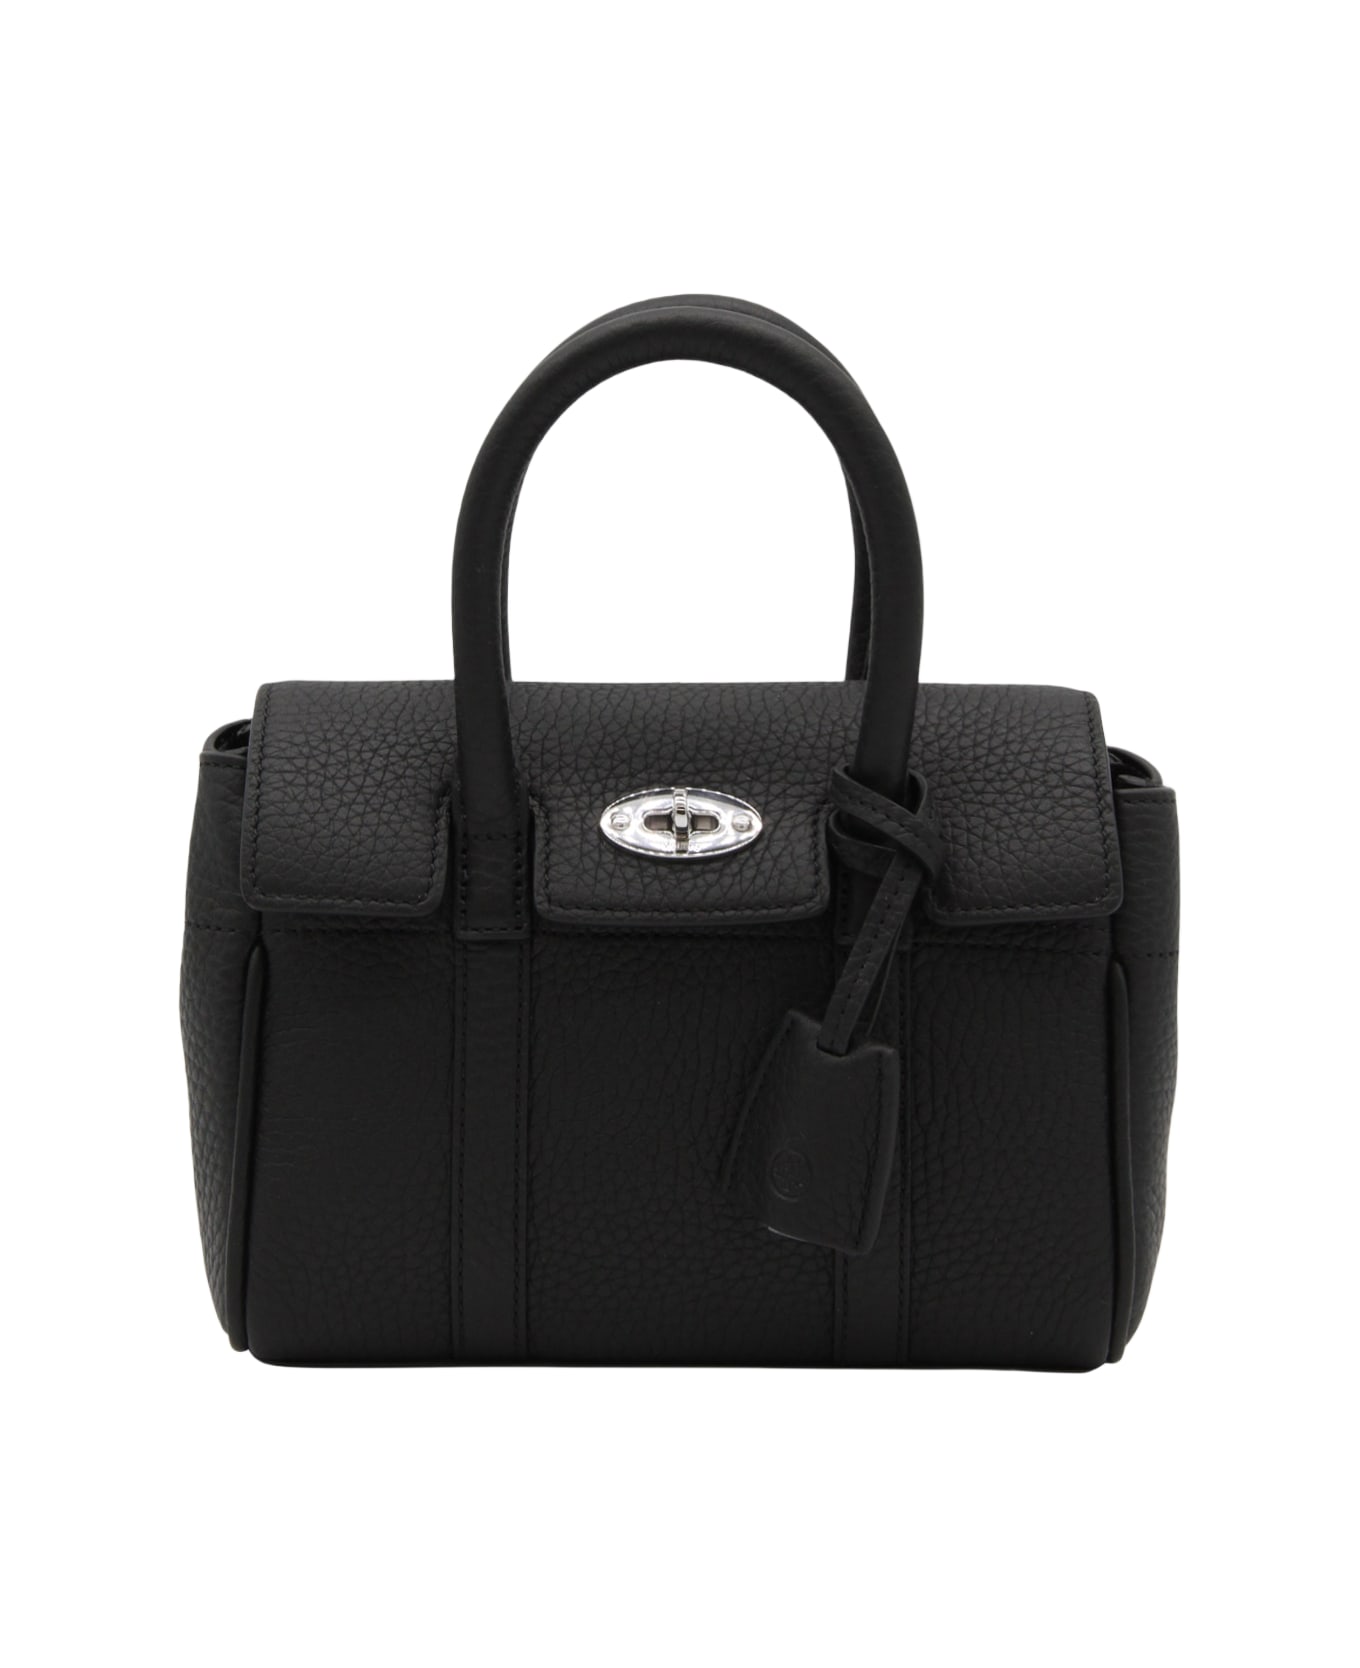 Mulberry Black Leather Mini Bayswater Heavy Top Handle Bag - Black トートバッグ